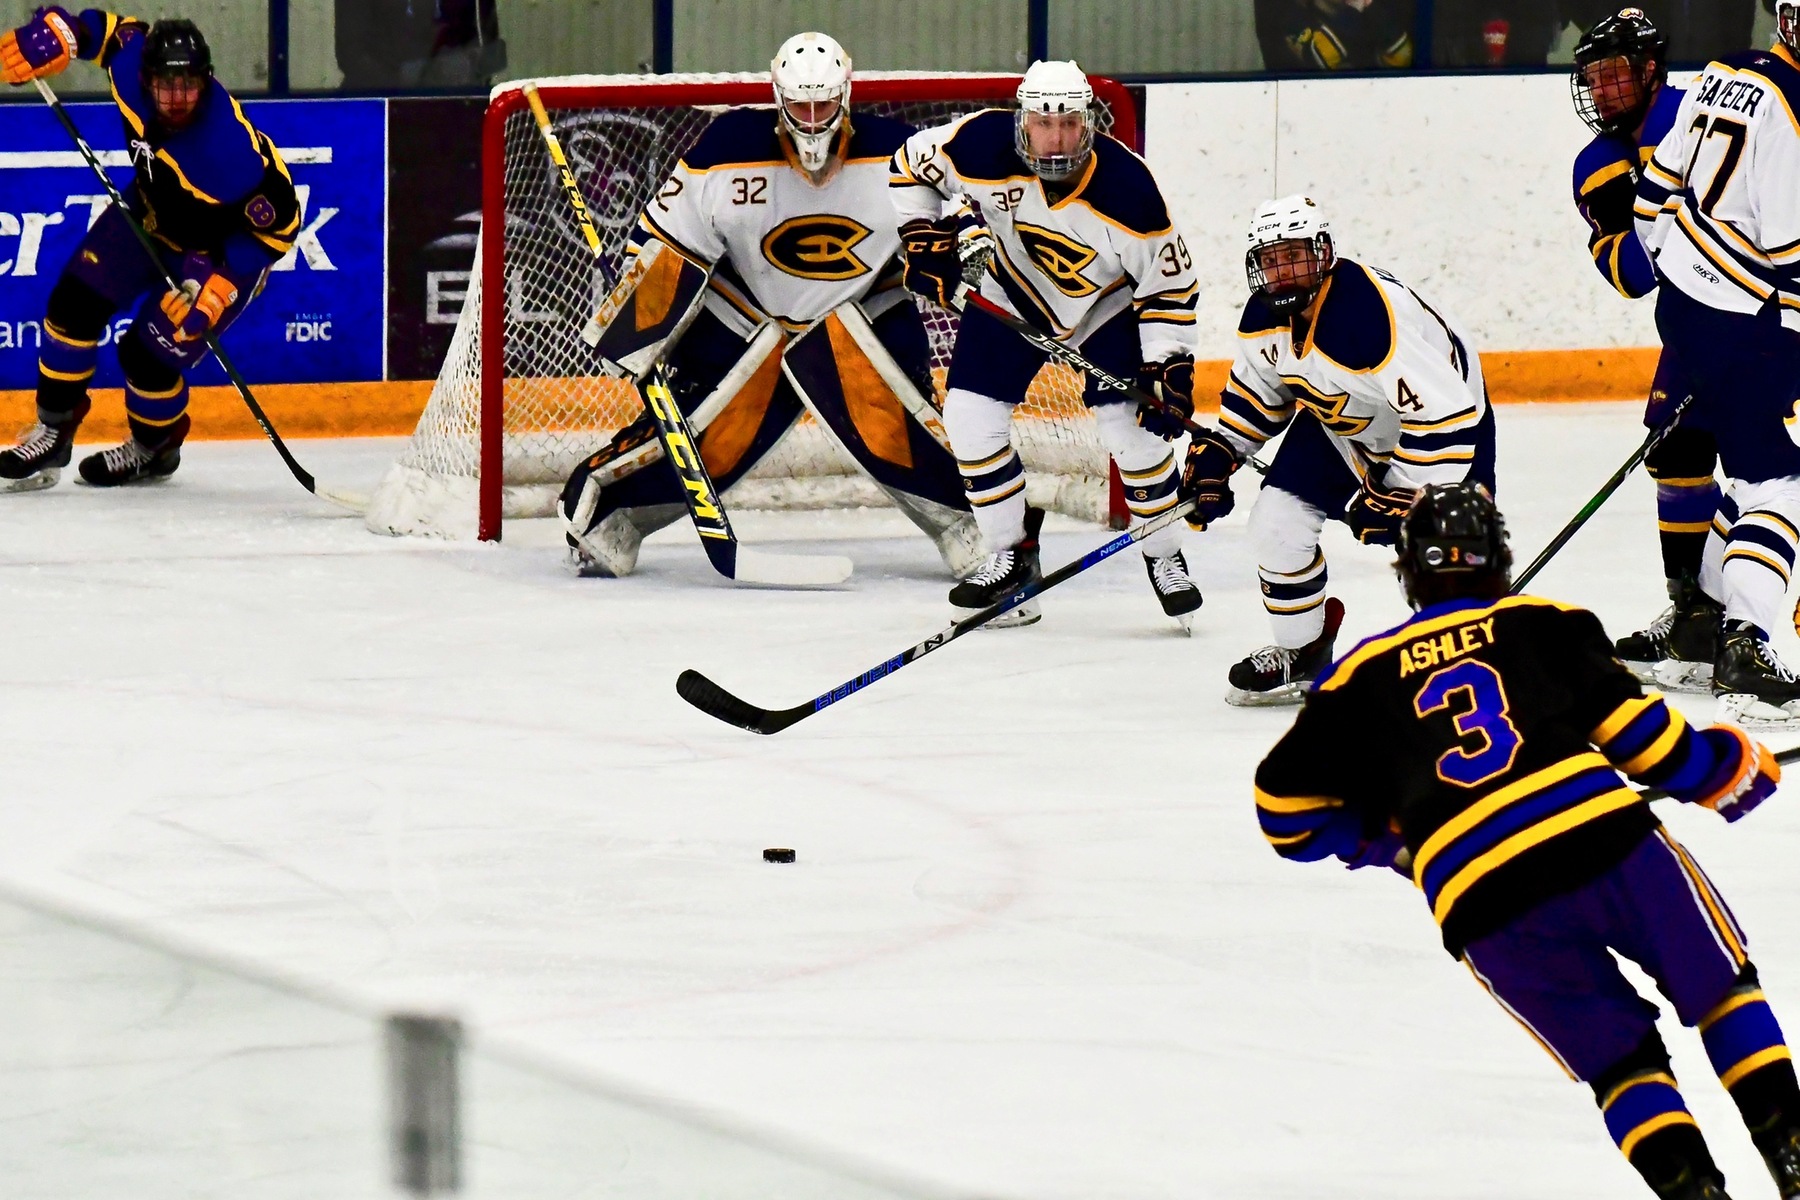 Blugolds skate to a draw with Pointers